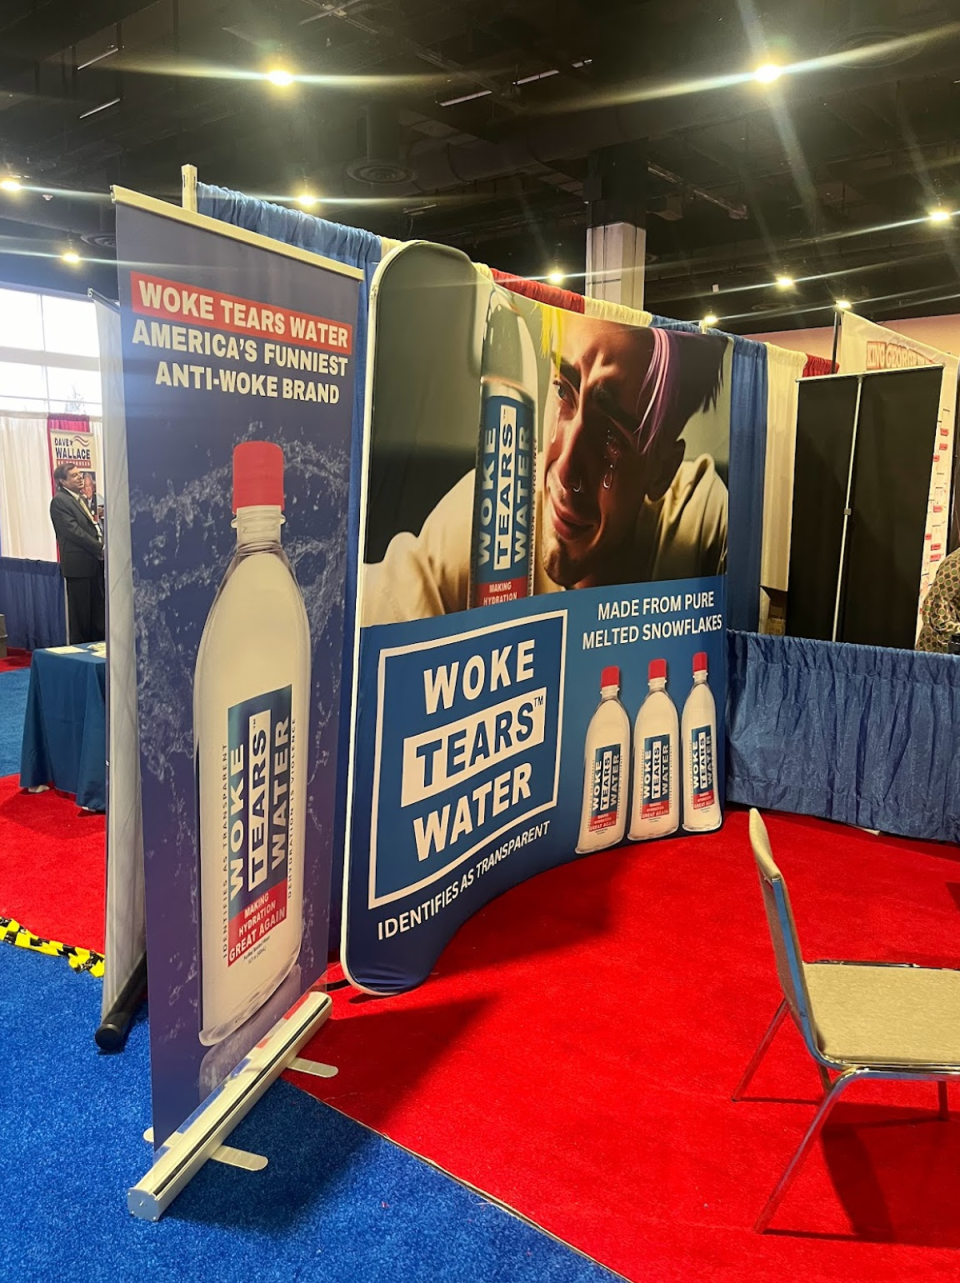 ‘Woke tears’ in a bottle was sold at CPAC (Gustaf Kilander / The Independent)